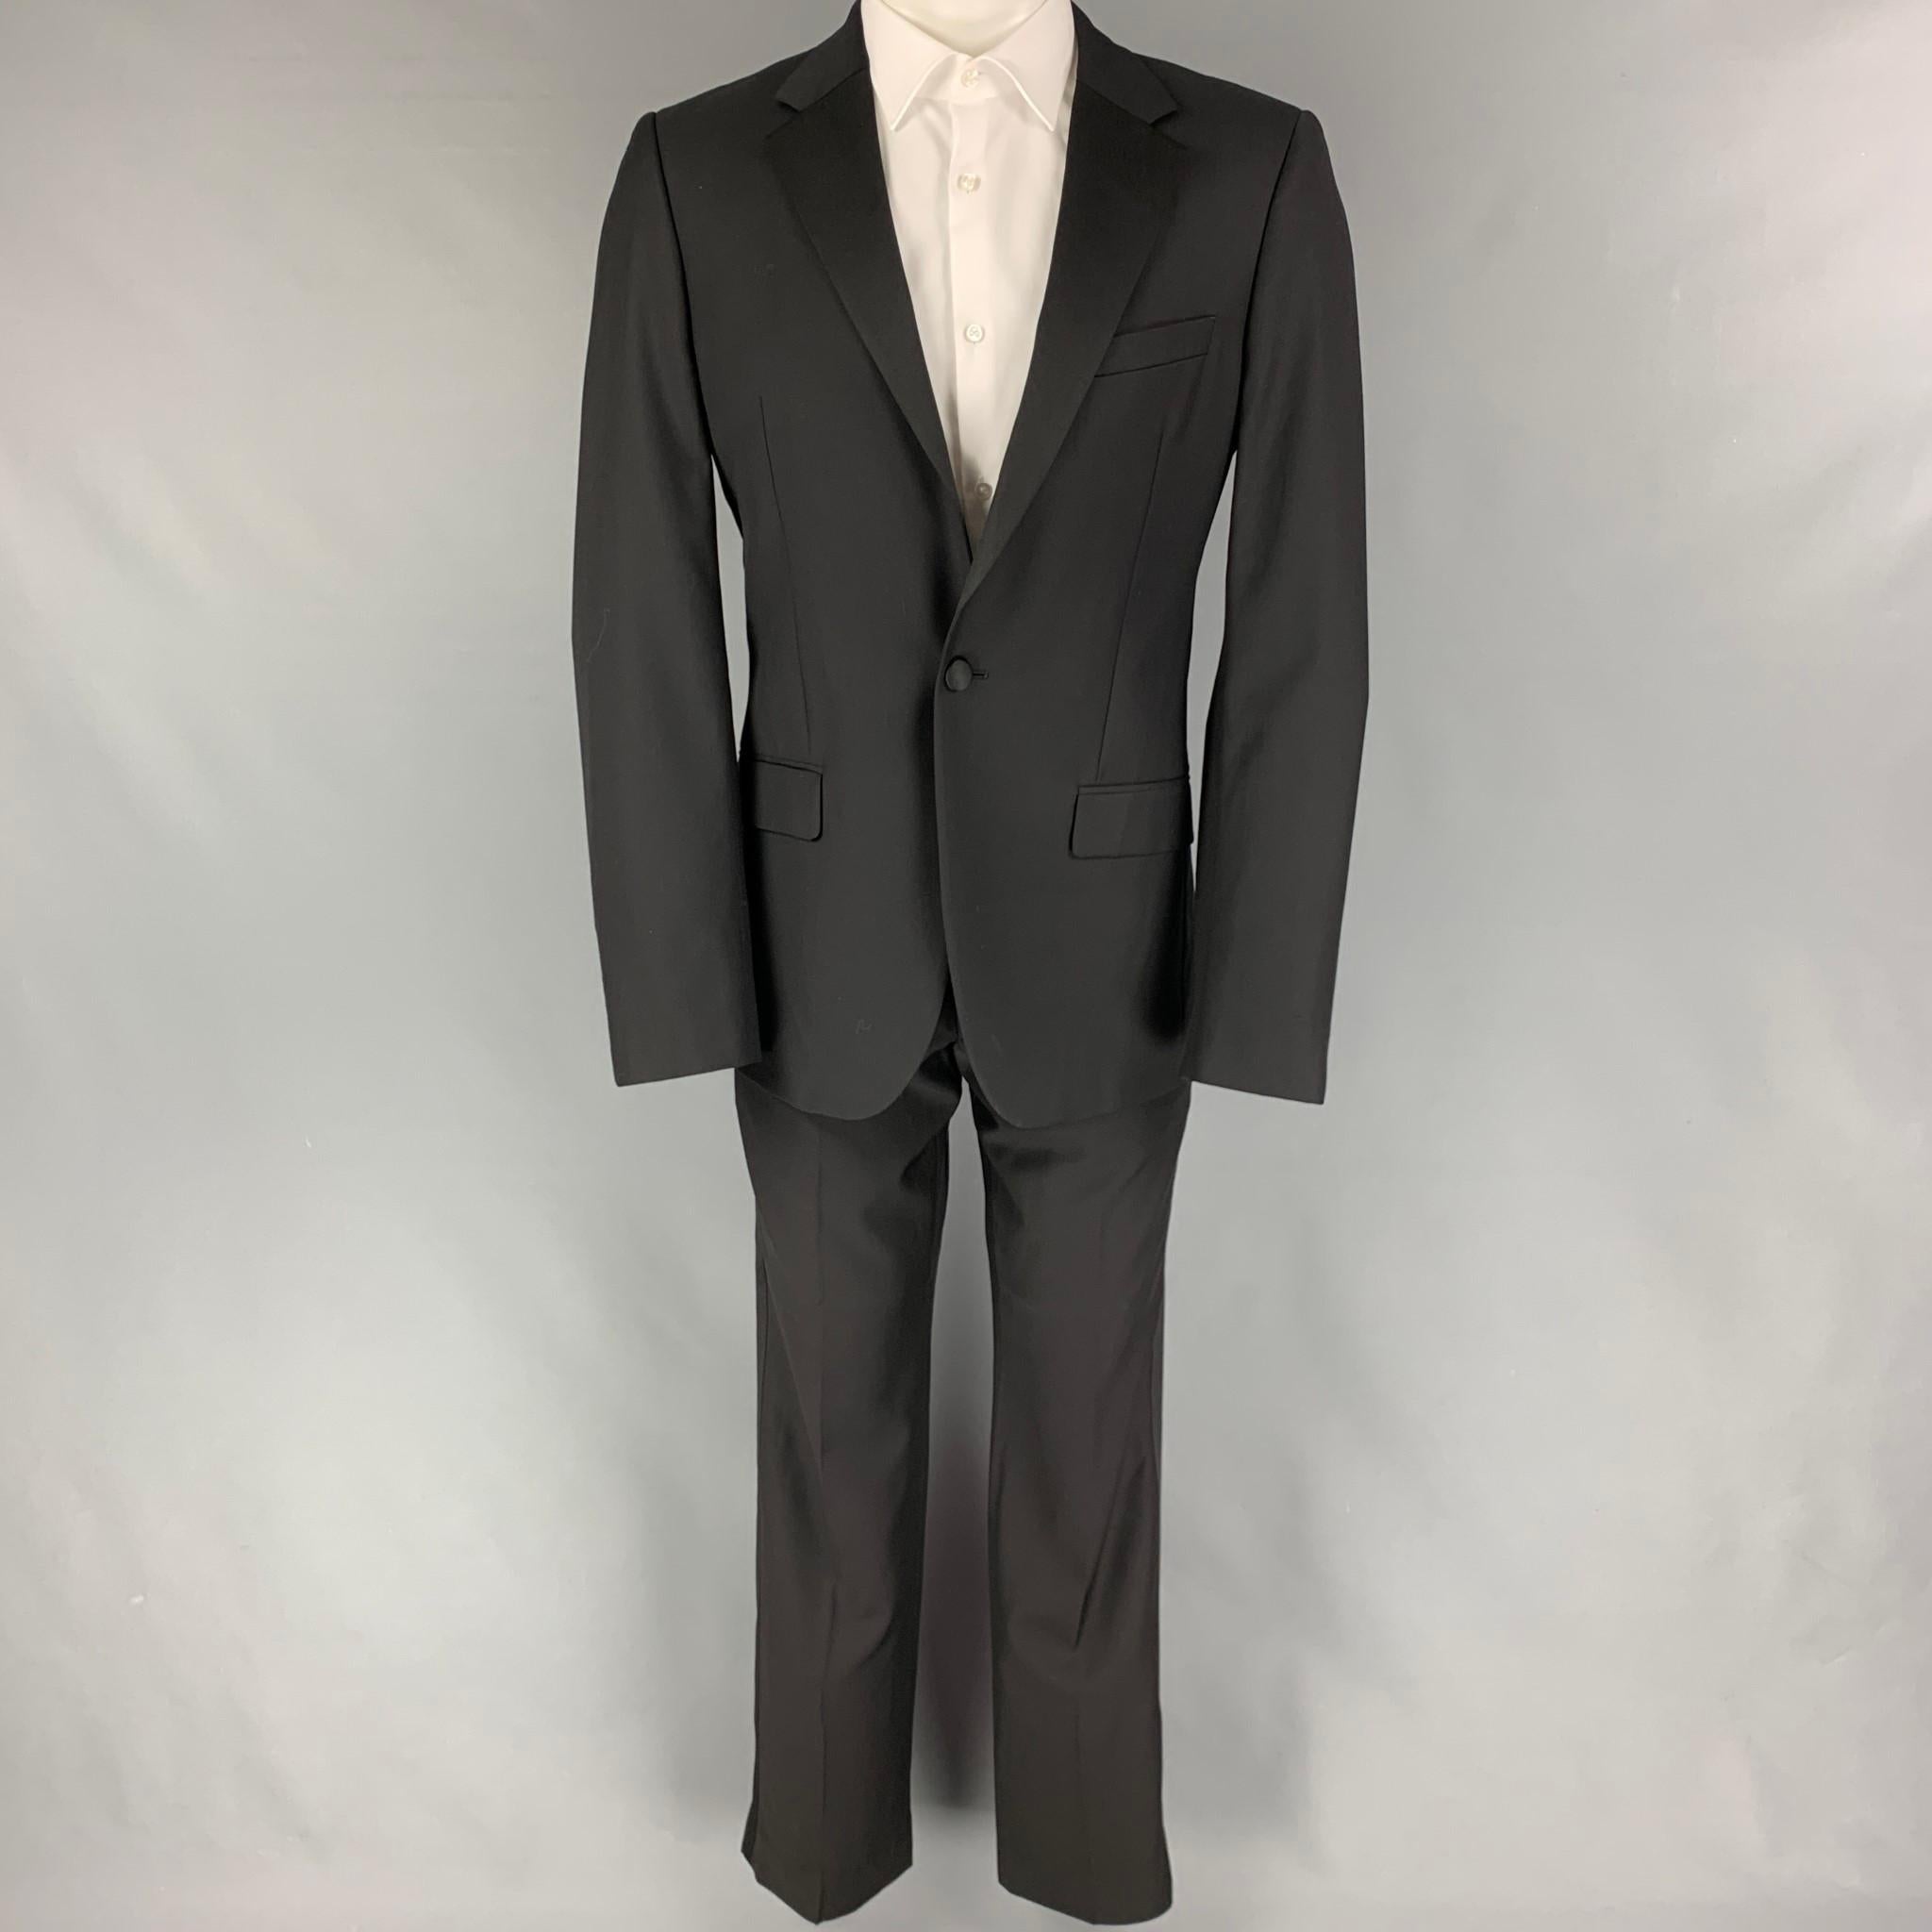 CALVIN KLEIN COLLECTION suit comes in a black wool with a full liner and includes a single breasted, single button sport coat with a notch lapel and matching flat front trousers.

Very Good Pre-Owned Condition.
Marked: